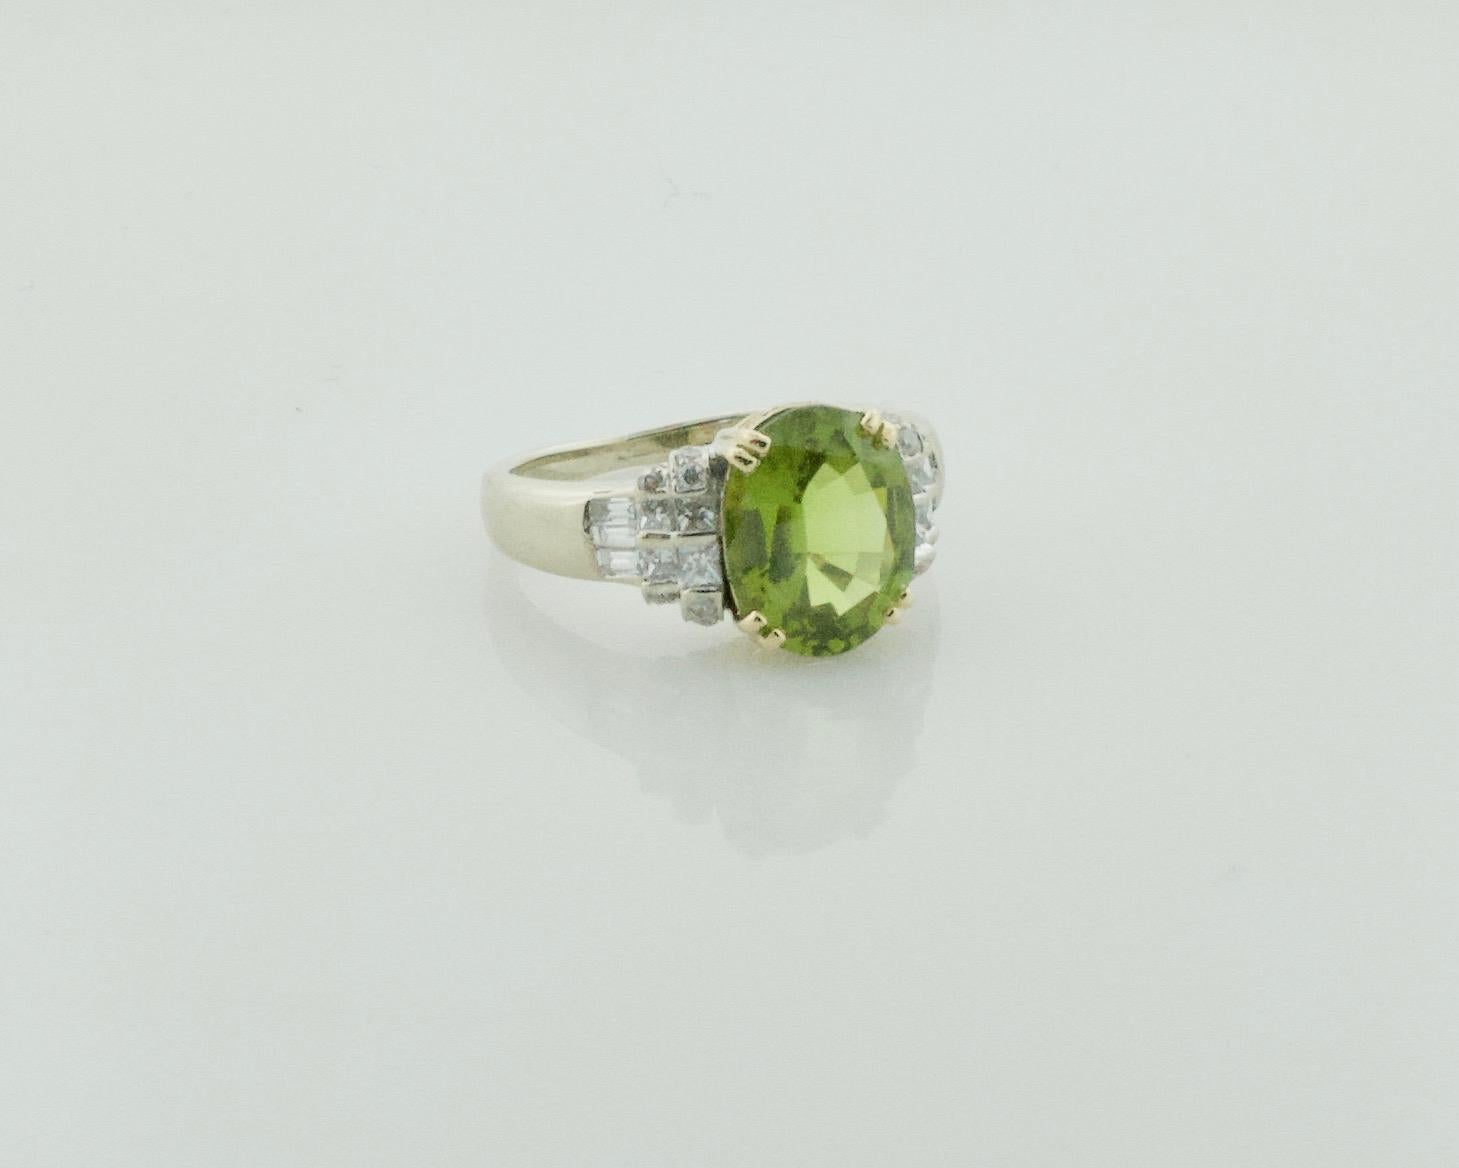 Peridot and Diamond Solitaire Ring in 18k

Introducing the stunning Lady’s 18K Yellow & White Gold Diamond/Peridot Ring - a true statement piece that exudes luxury and elegance. Crafted with care and precision, this exquisite ring features a